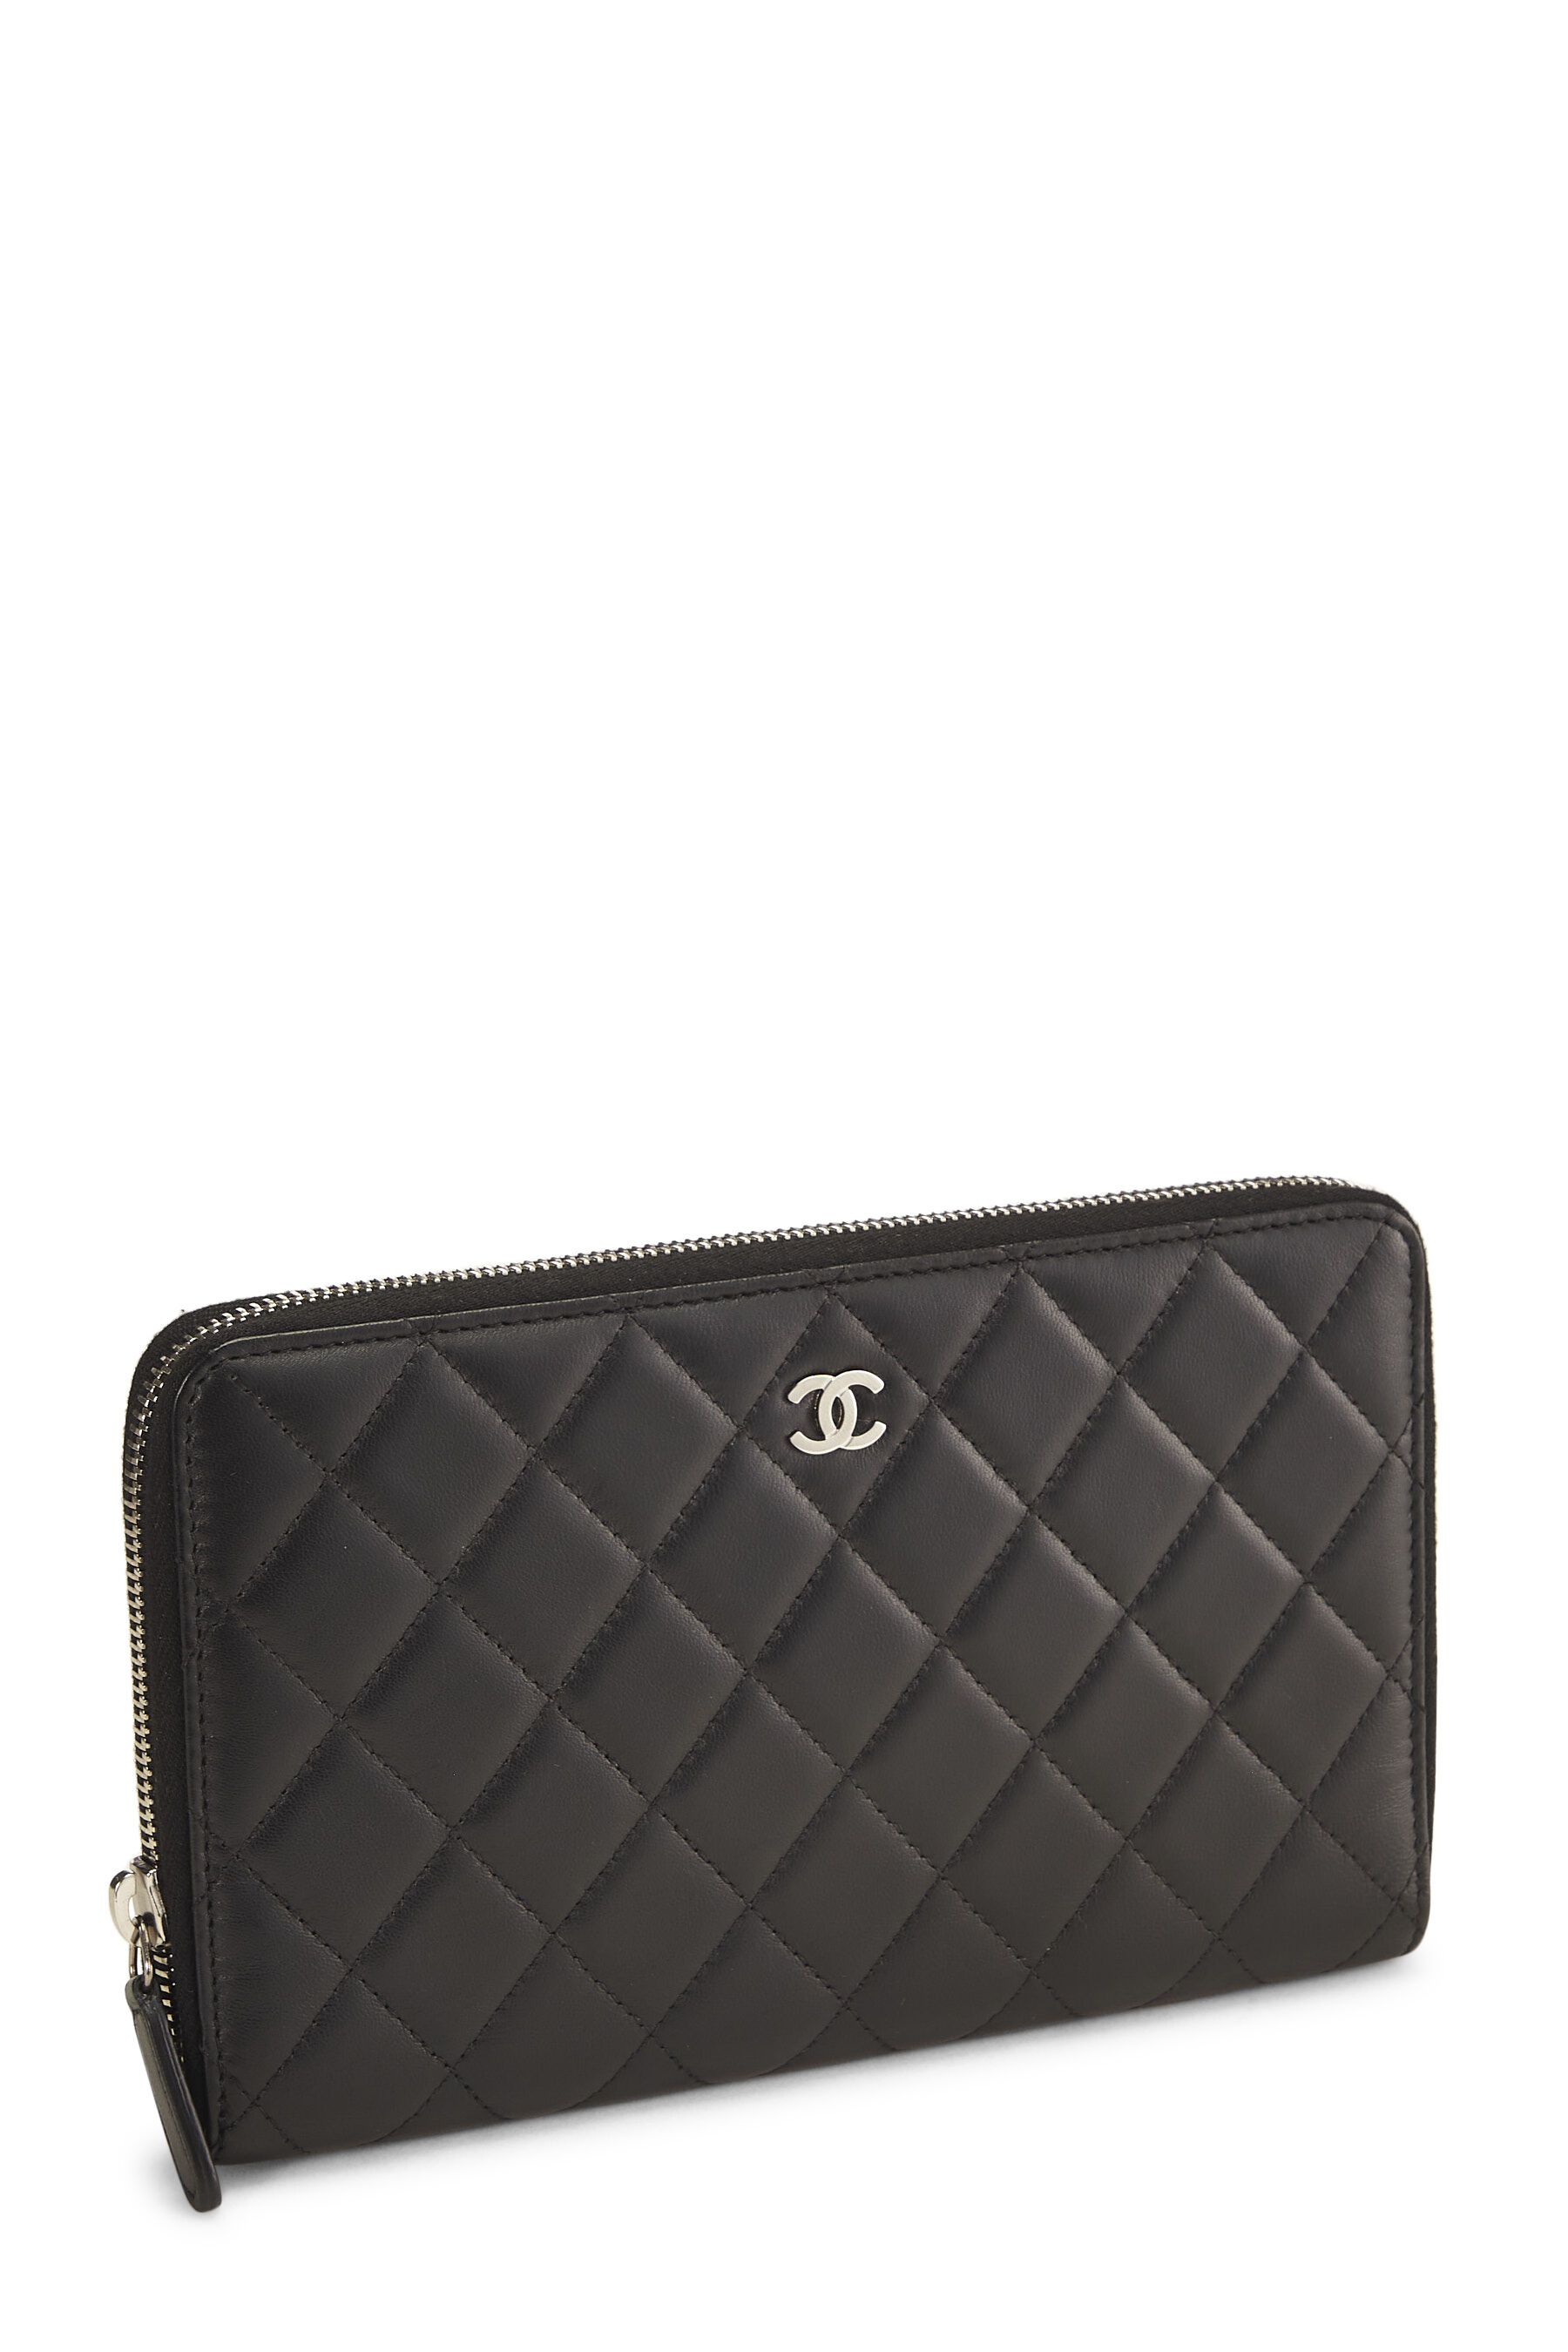 Chanel Black Quilted Lambskin Classic Flap Card Holder Q6A3EO1IKB000